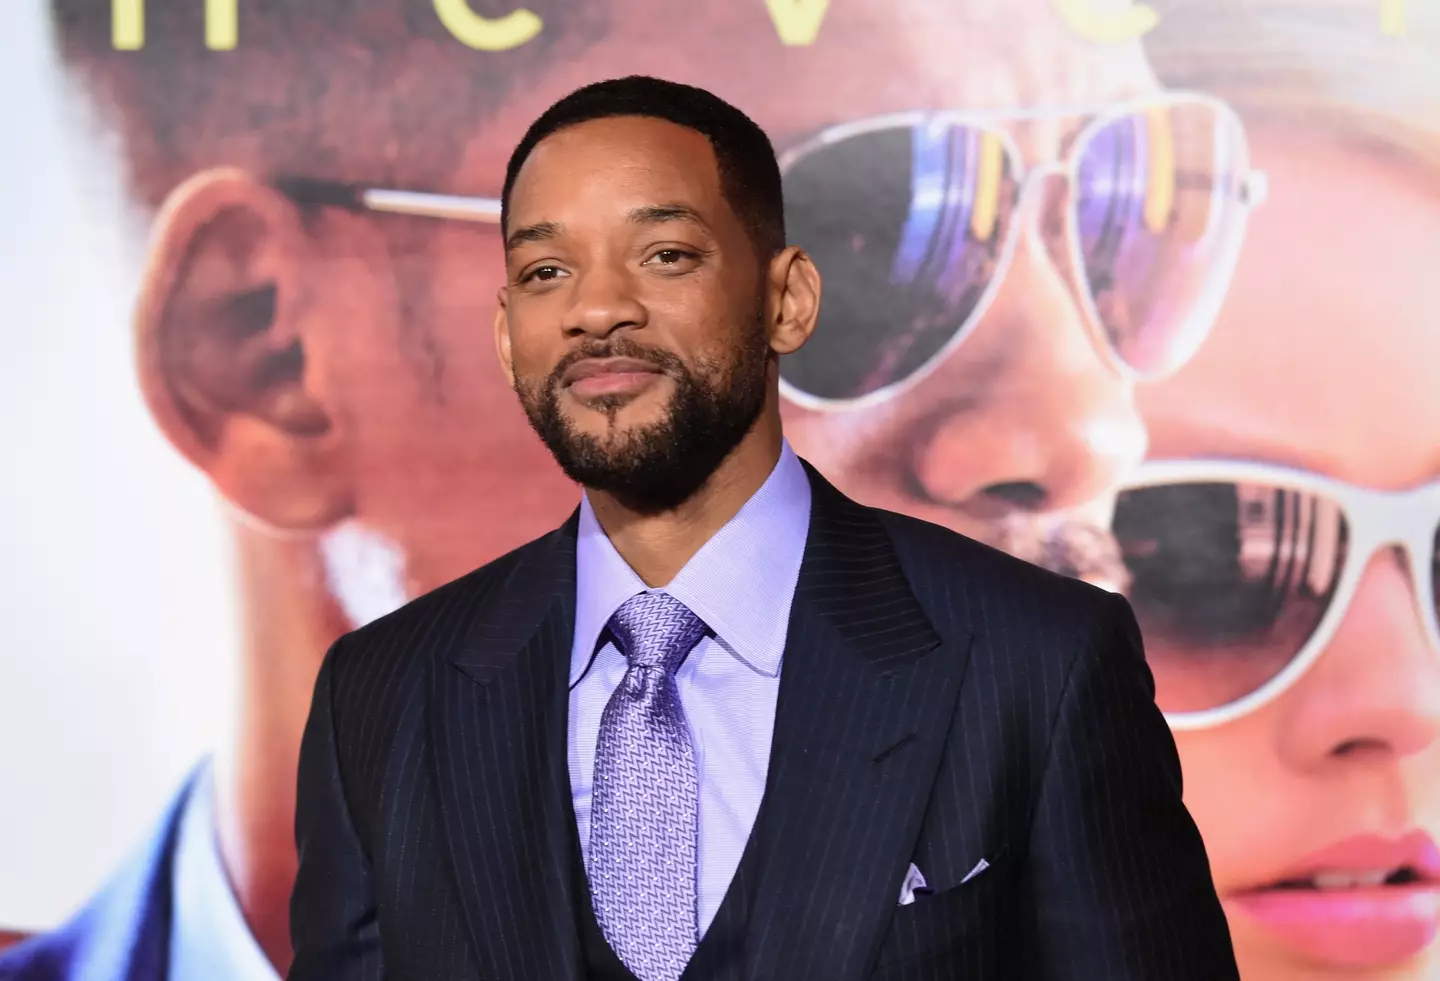 Will Smith is taking legal action over the recent allegations.